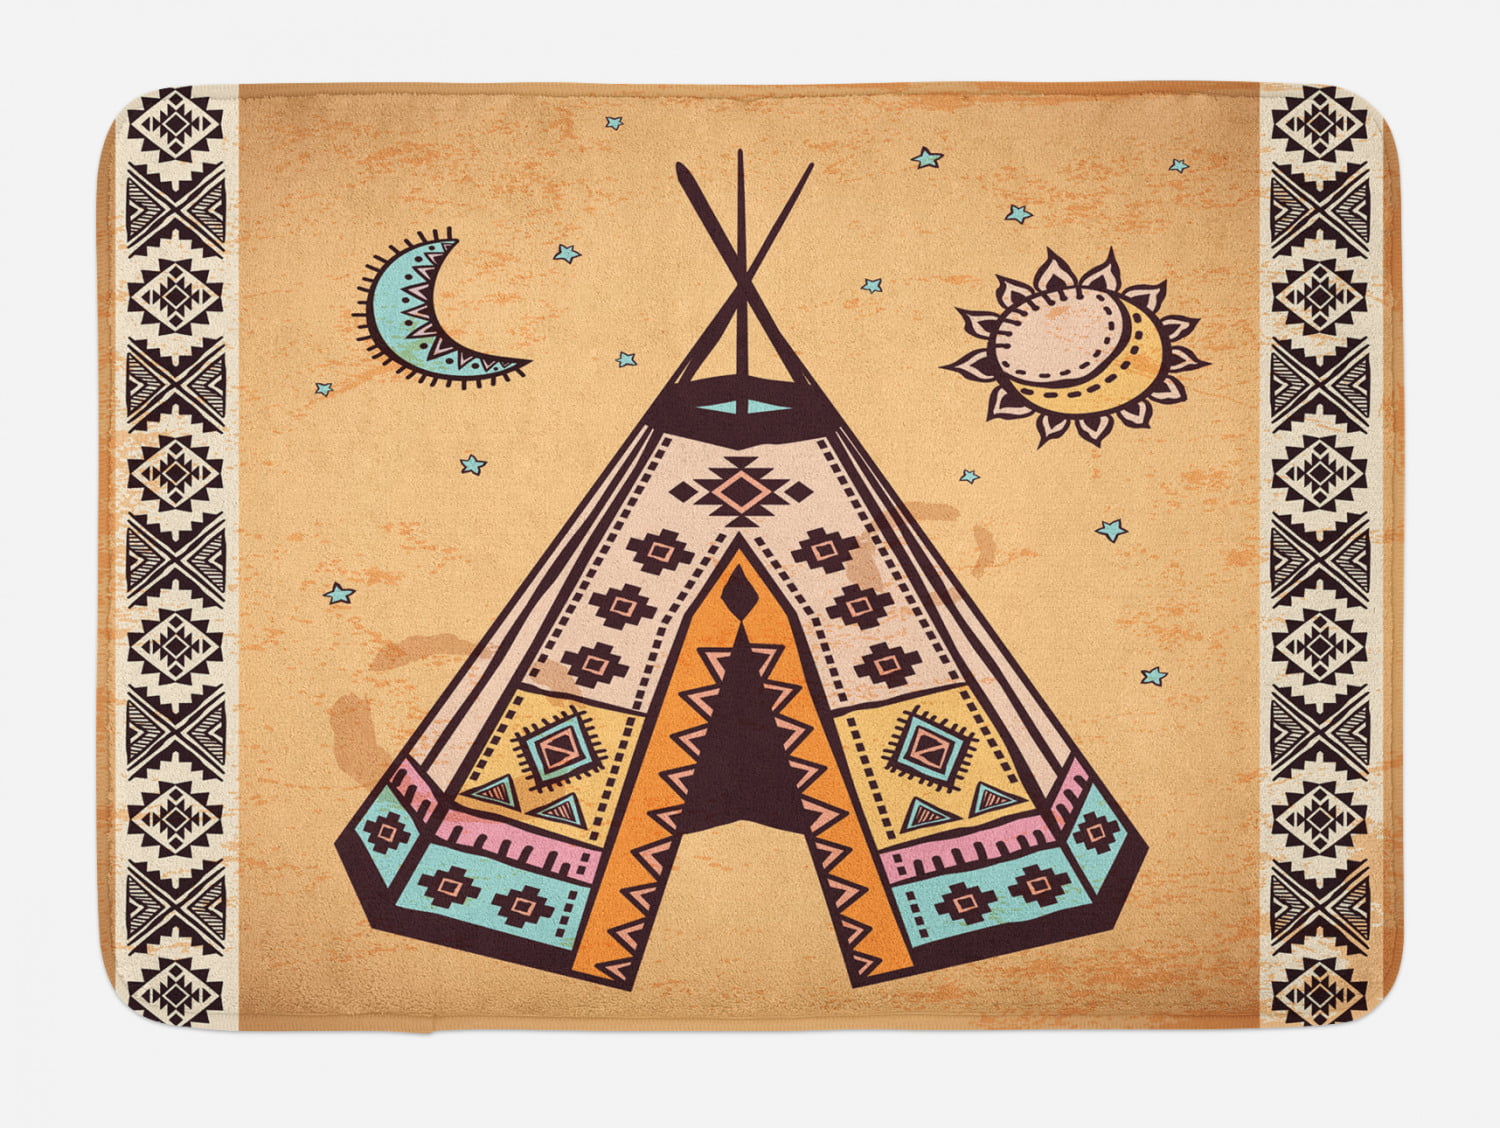 Hand Drawn Dreamcathcher Folkloric Birds Image Teal Coral 29.5 X 17.5 Ambesonne Tribal Bath Mat Plush Bathroom Decor Mat with Non Slip Backing